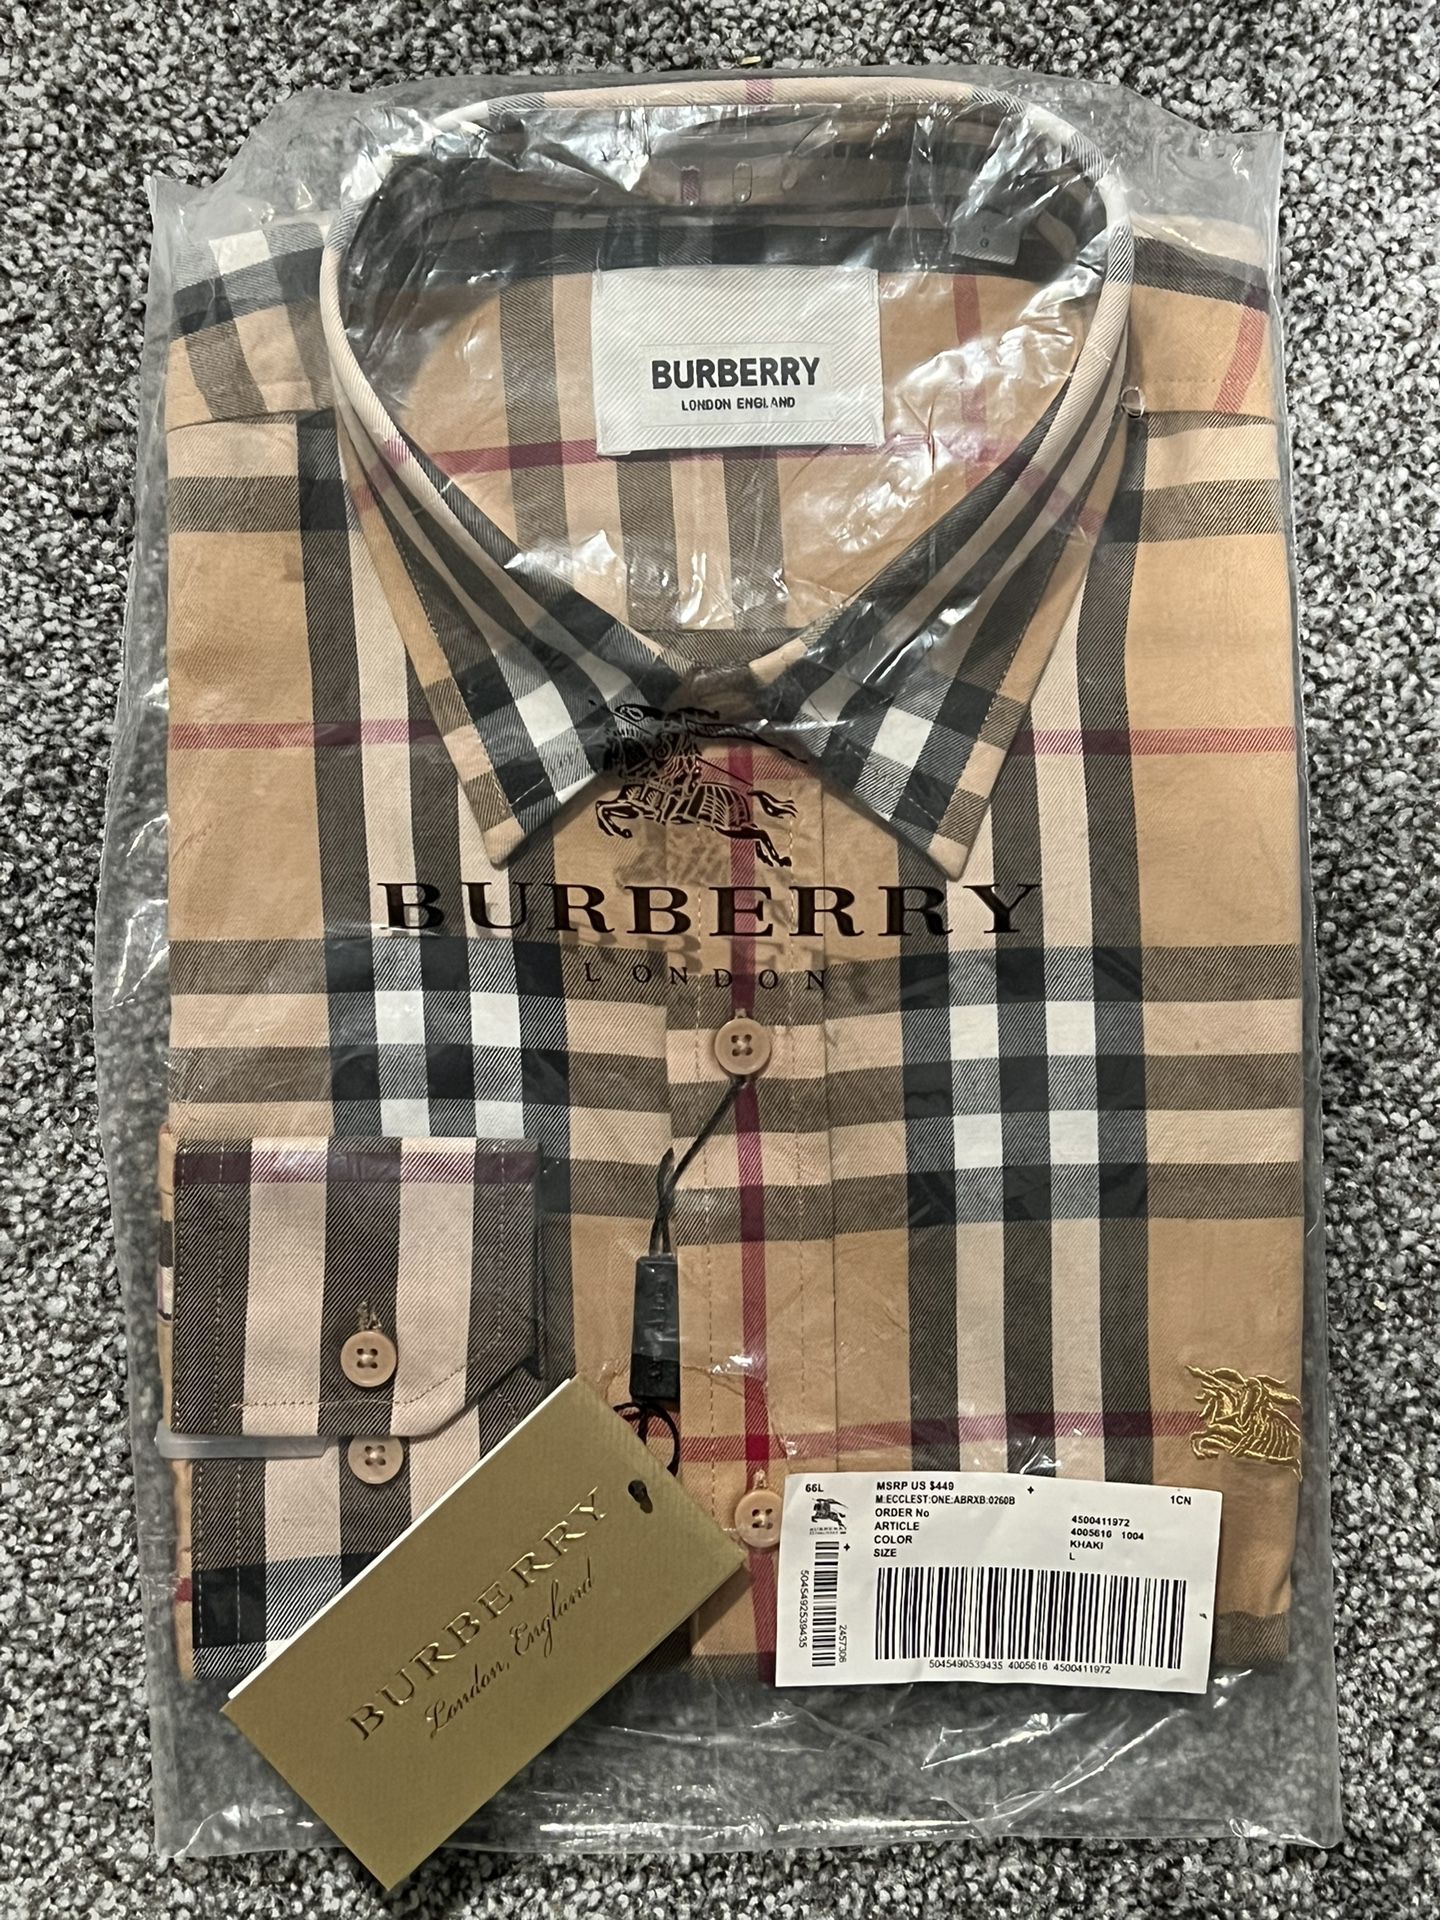 Burberry Shirt & Belt for Sale in Brooklyn, NY - OfferUp